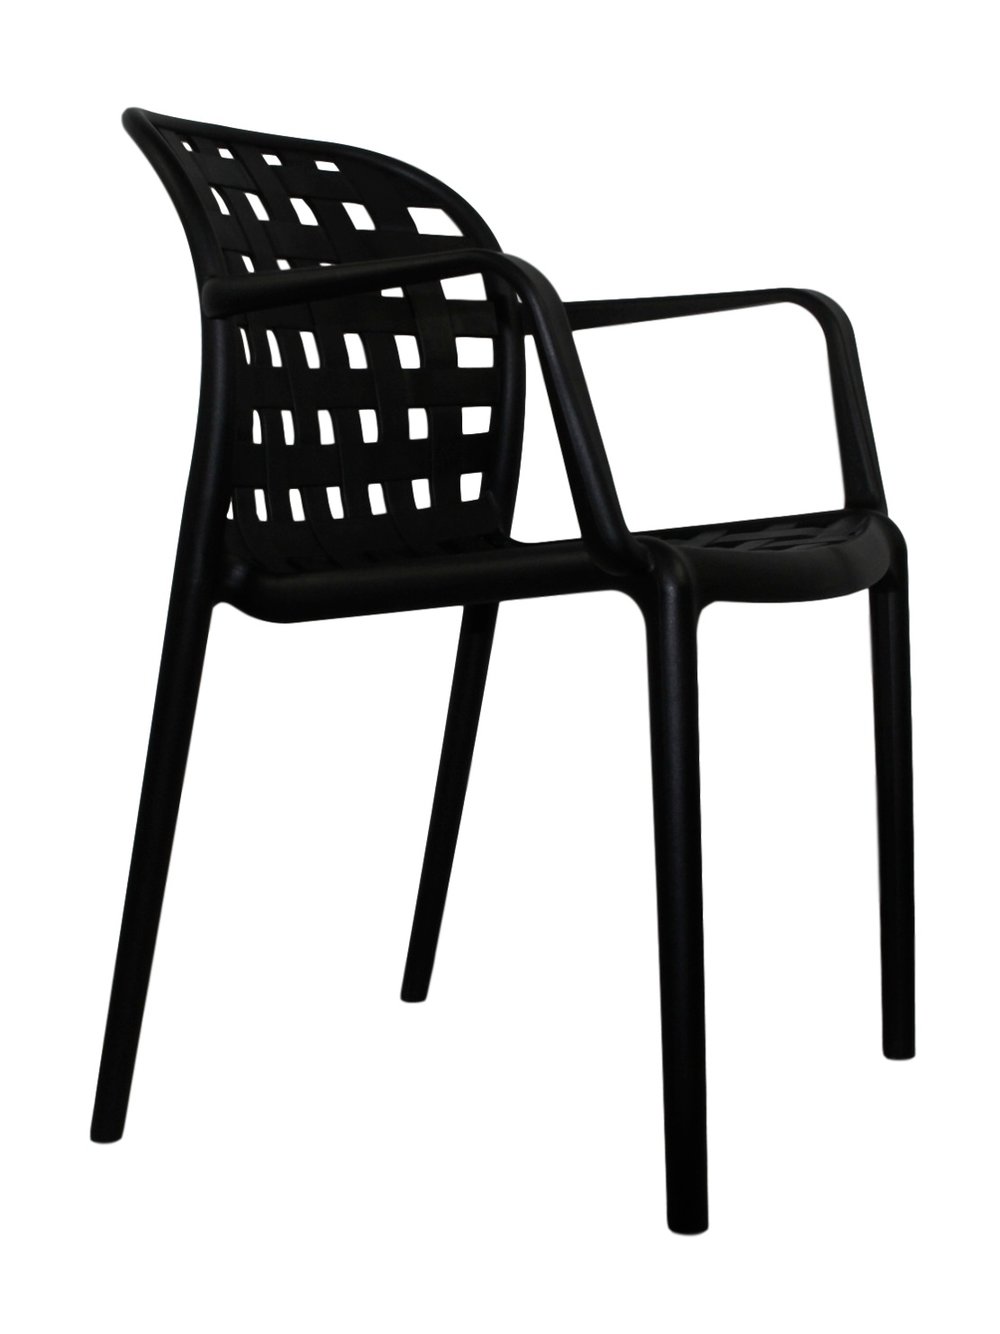 Outdoor Chairs Stackable, Black Plastic Stackable Outdoor Chairs